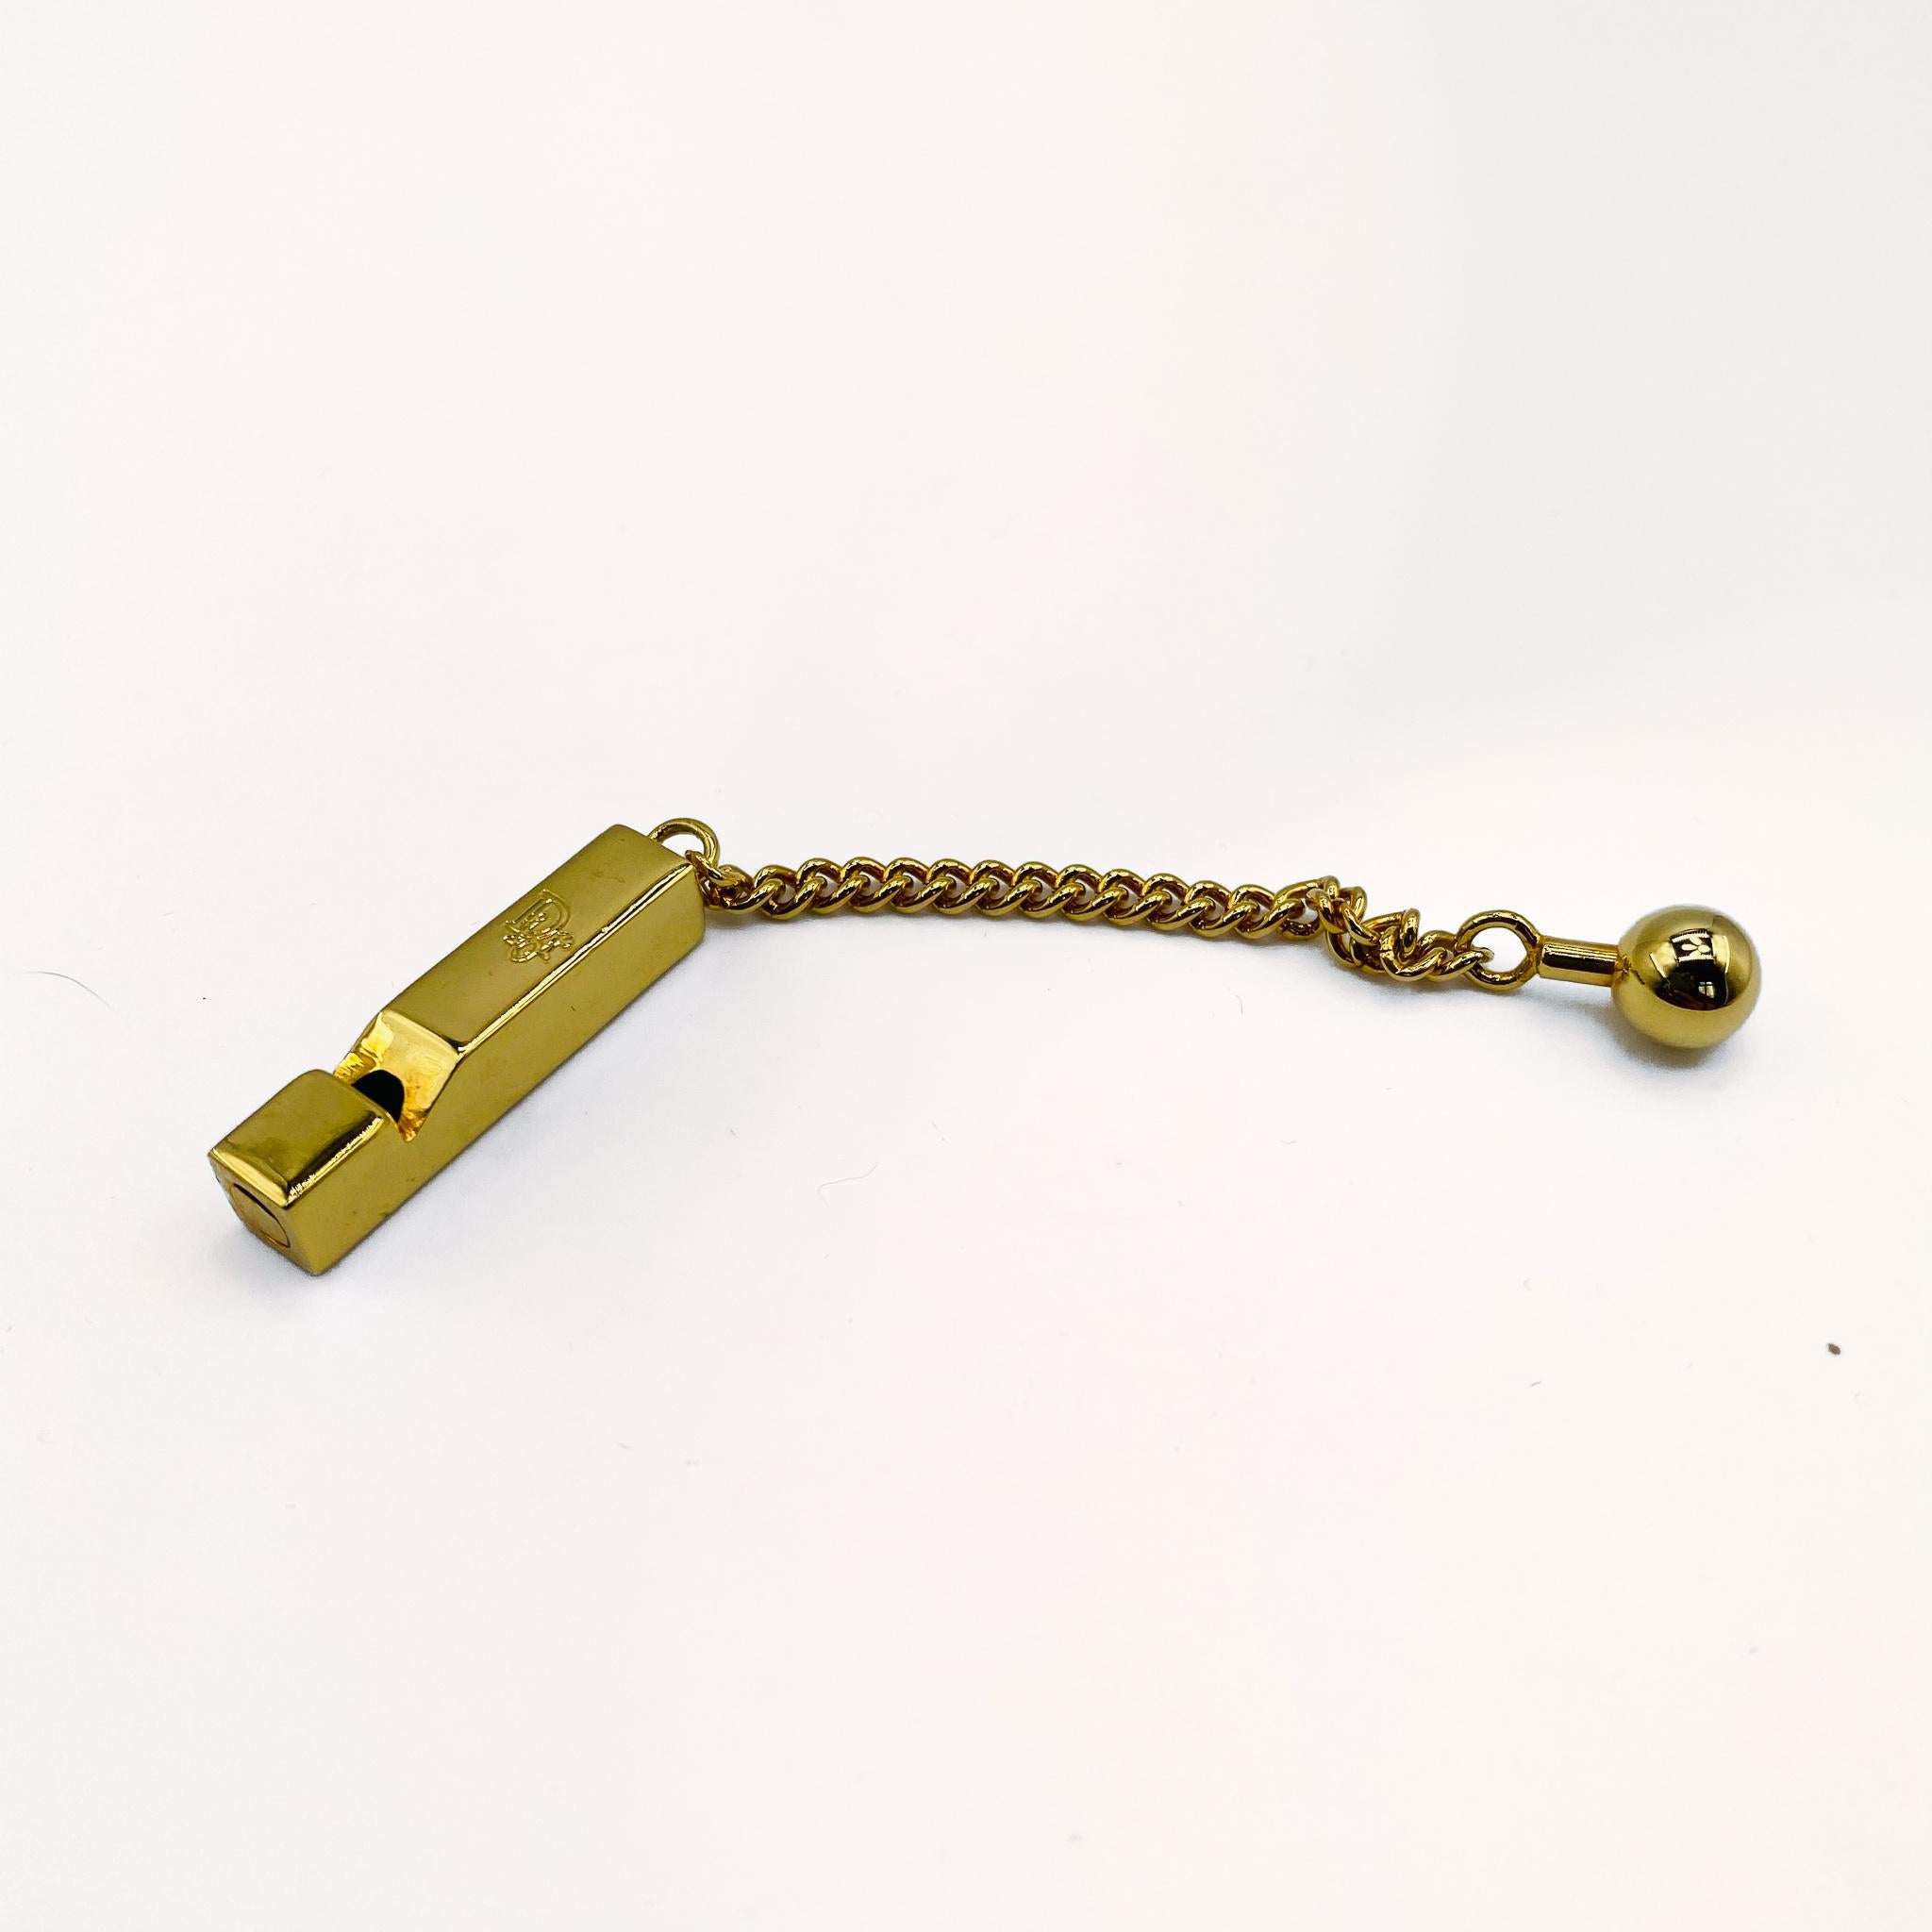 Christian Dior Whistle 1970s

Super cool Christian Dior whistle. Made in Germany in the 1970s from 18 karat gold plated metal.  Comes with original box

The Christian Dior aesthetic for timelessly elegant chic originated in the 1940s with the  ‘New